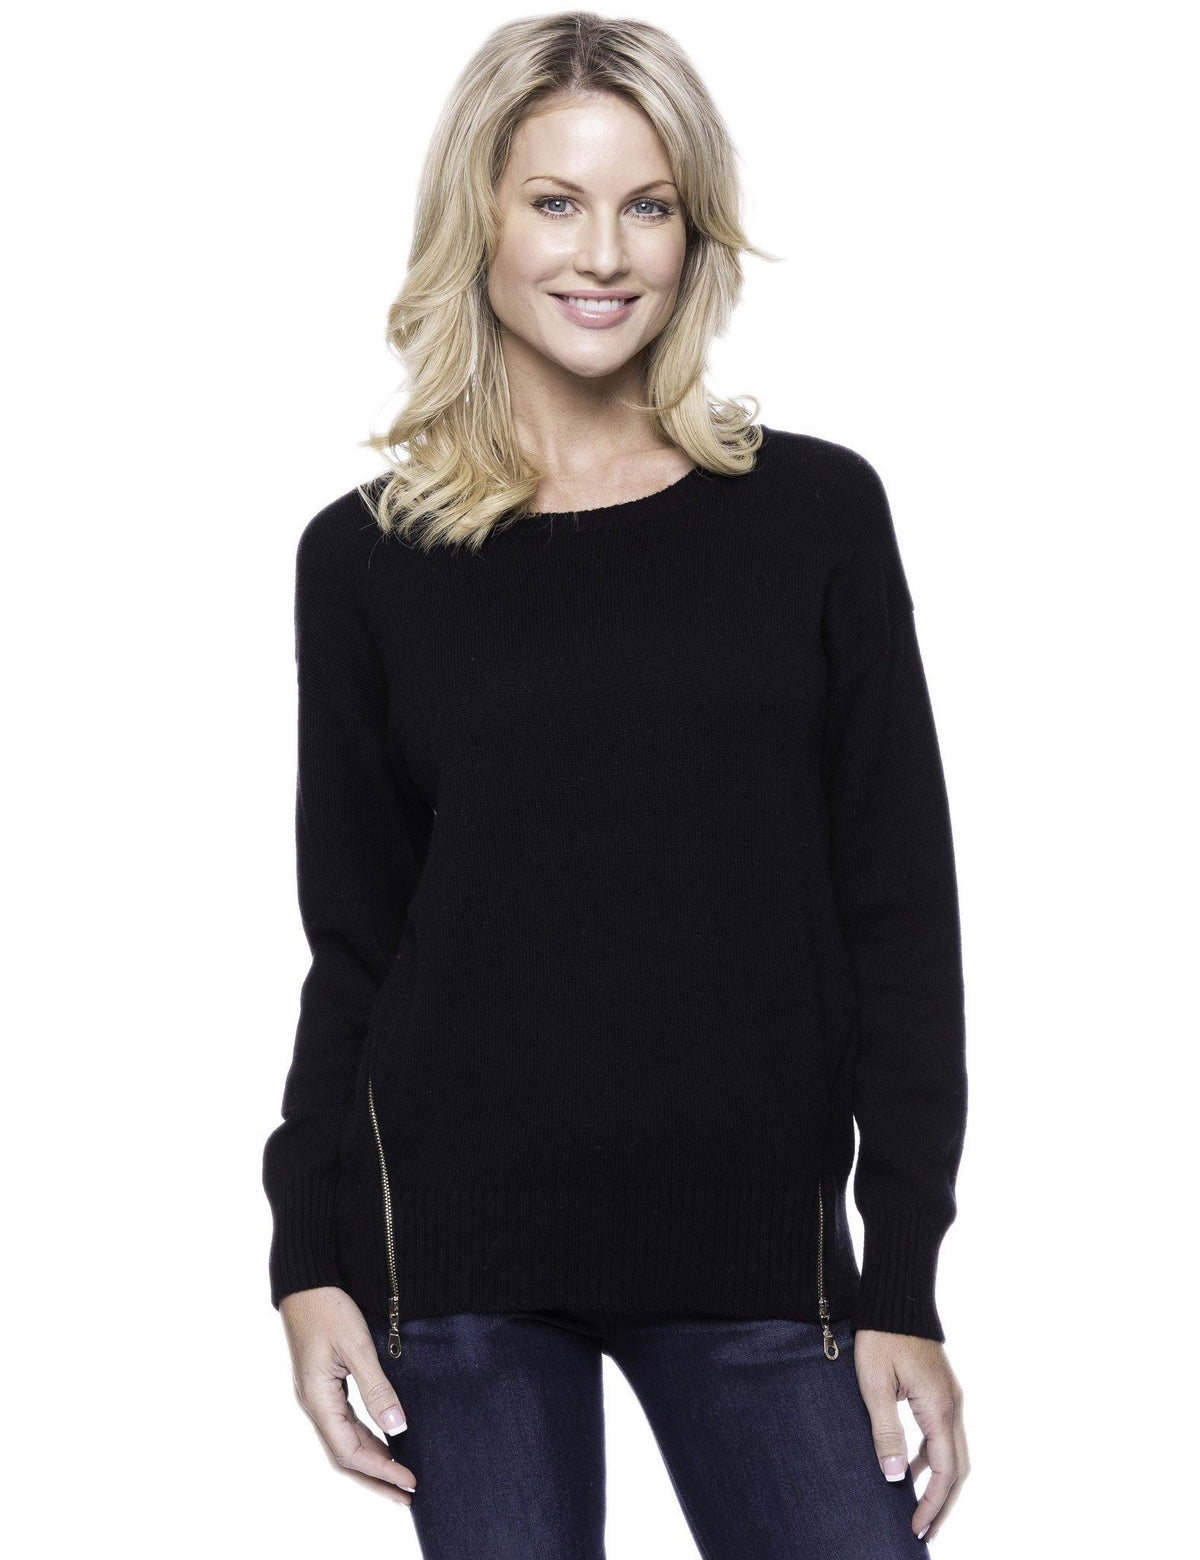 Women's Cashmere Blend Crew Neck Sweater with Side Zip - Black